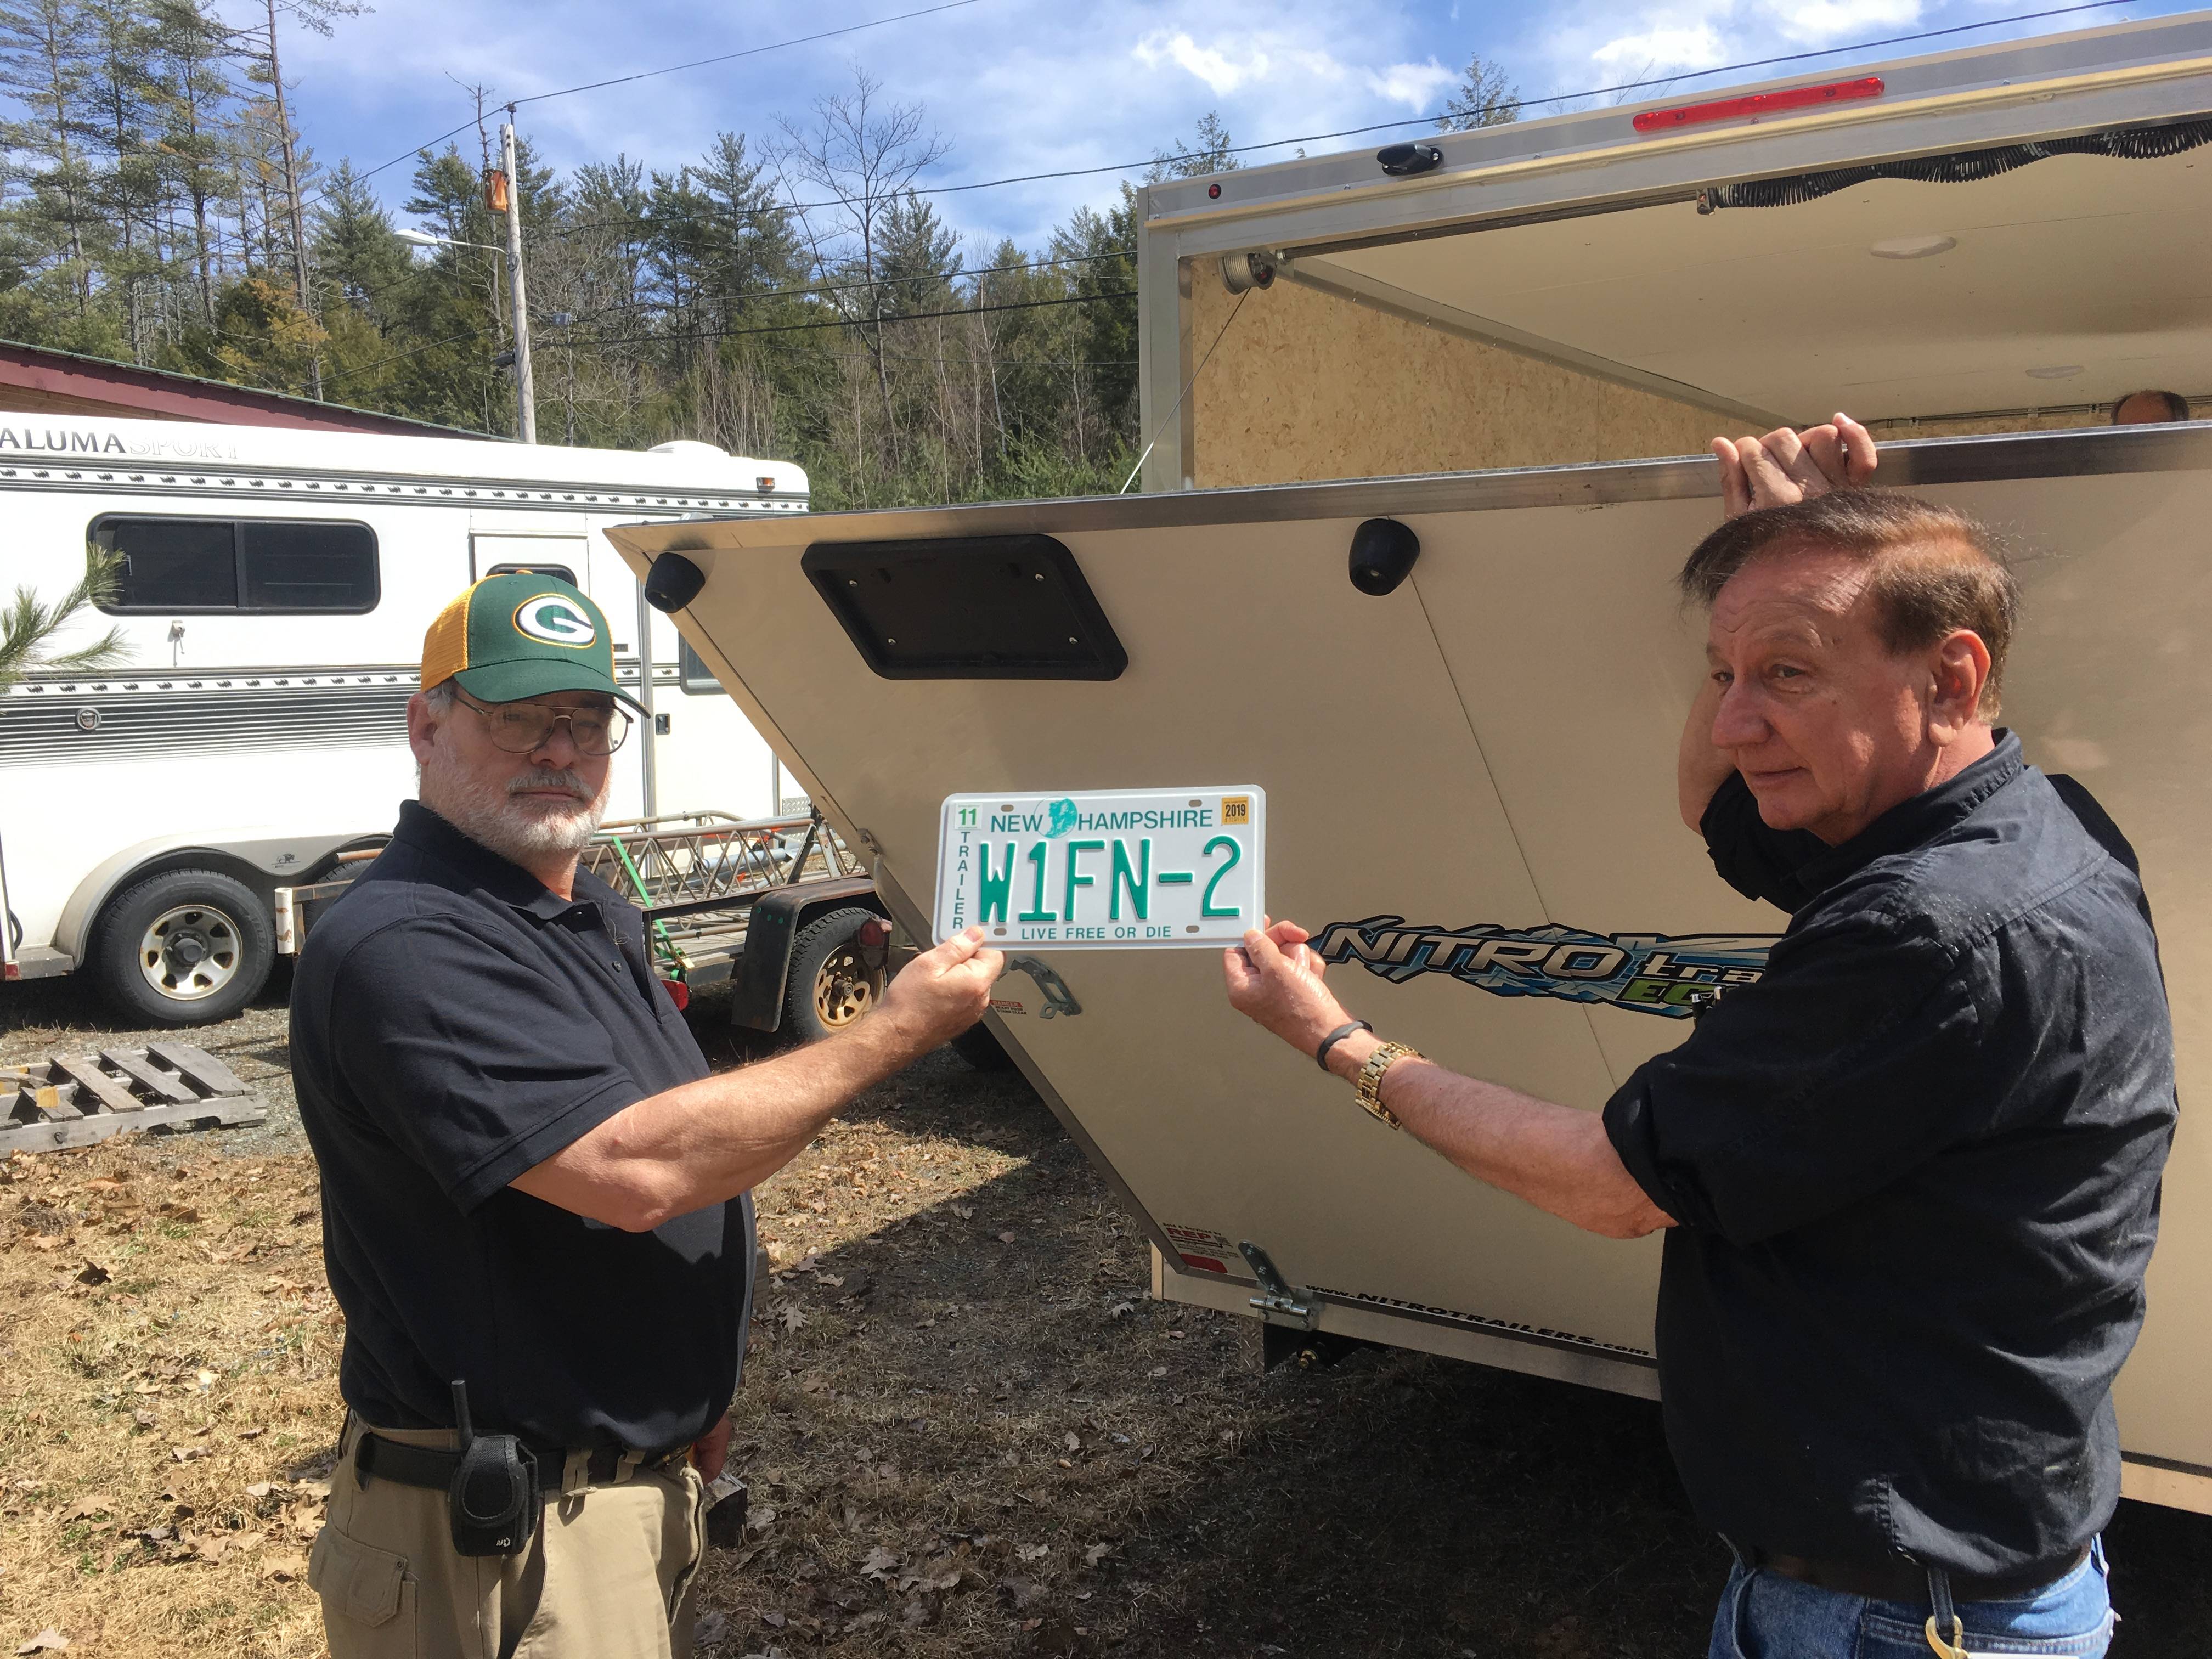 Al and Fred admiring the new plate